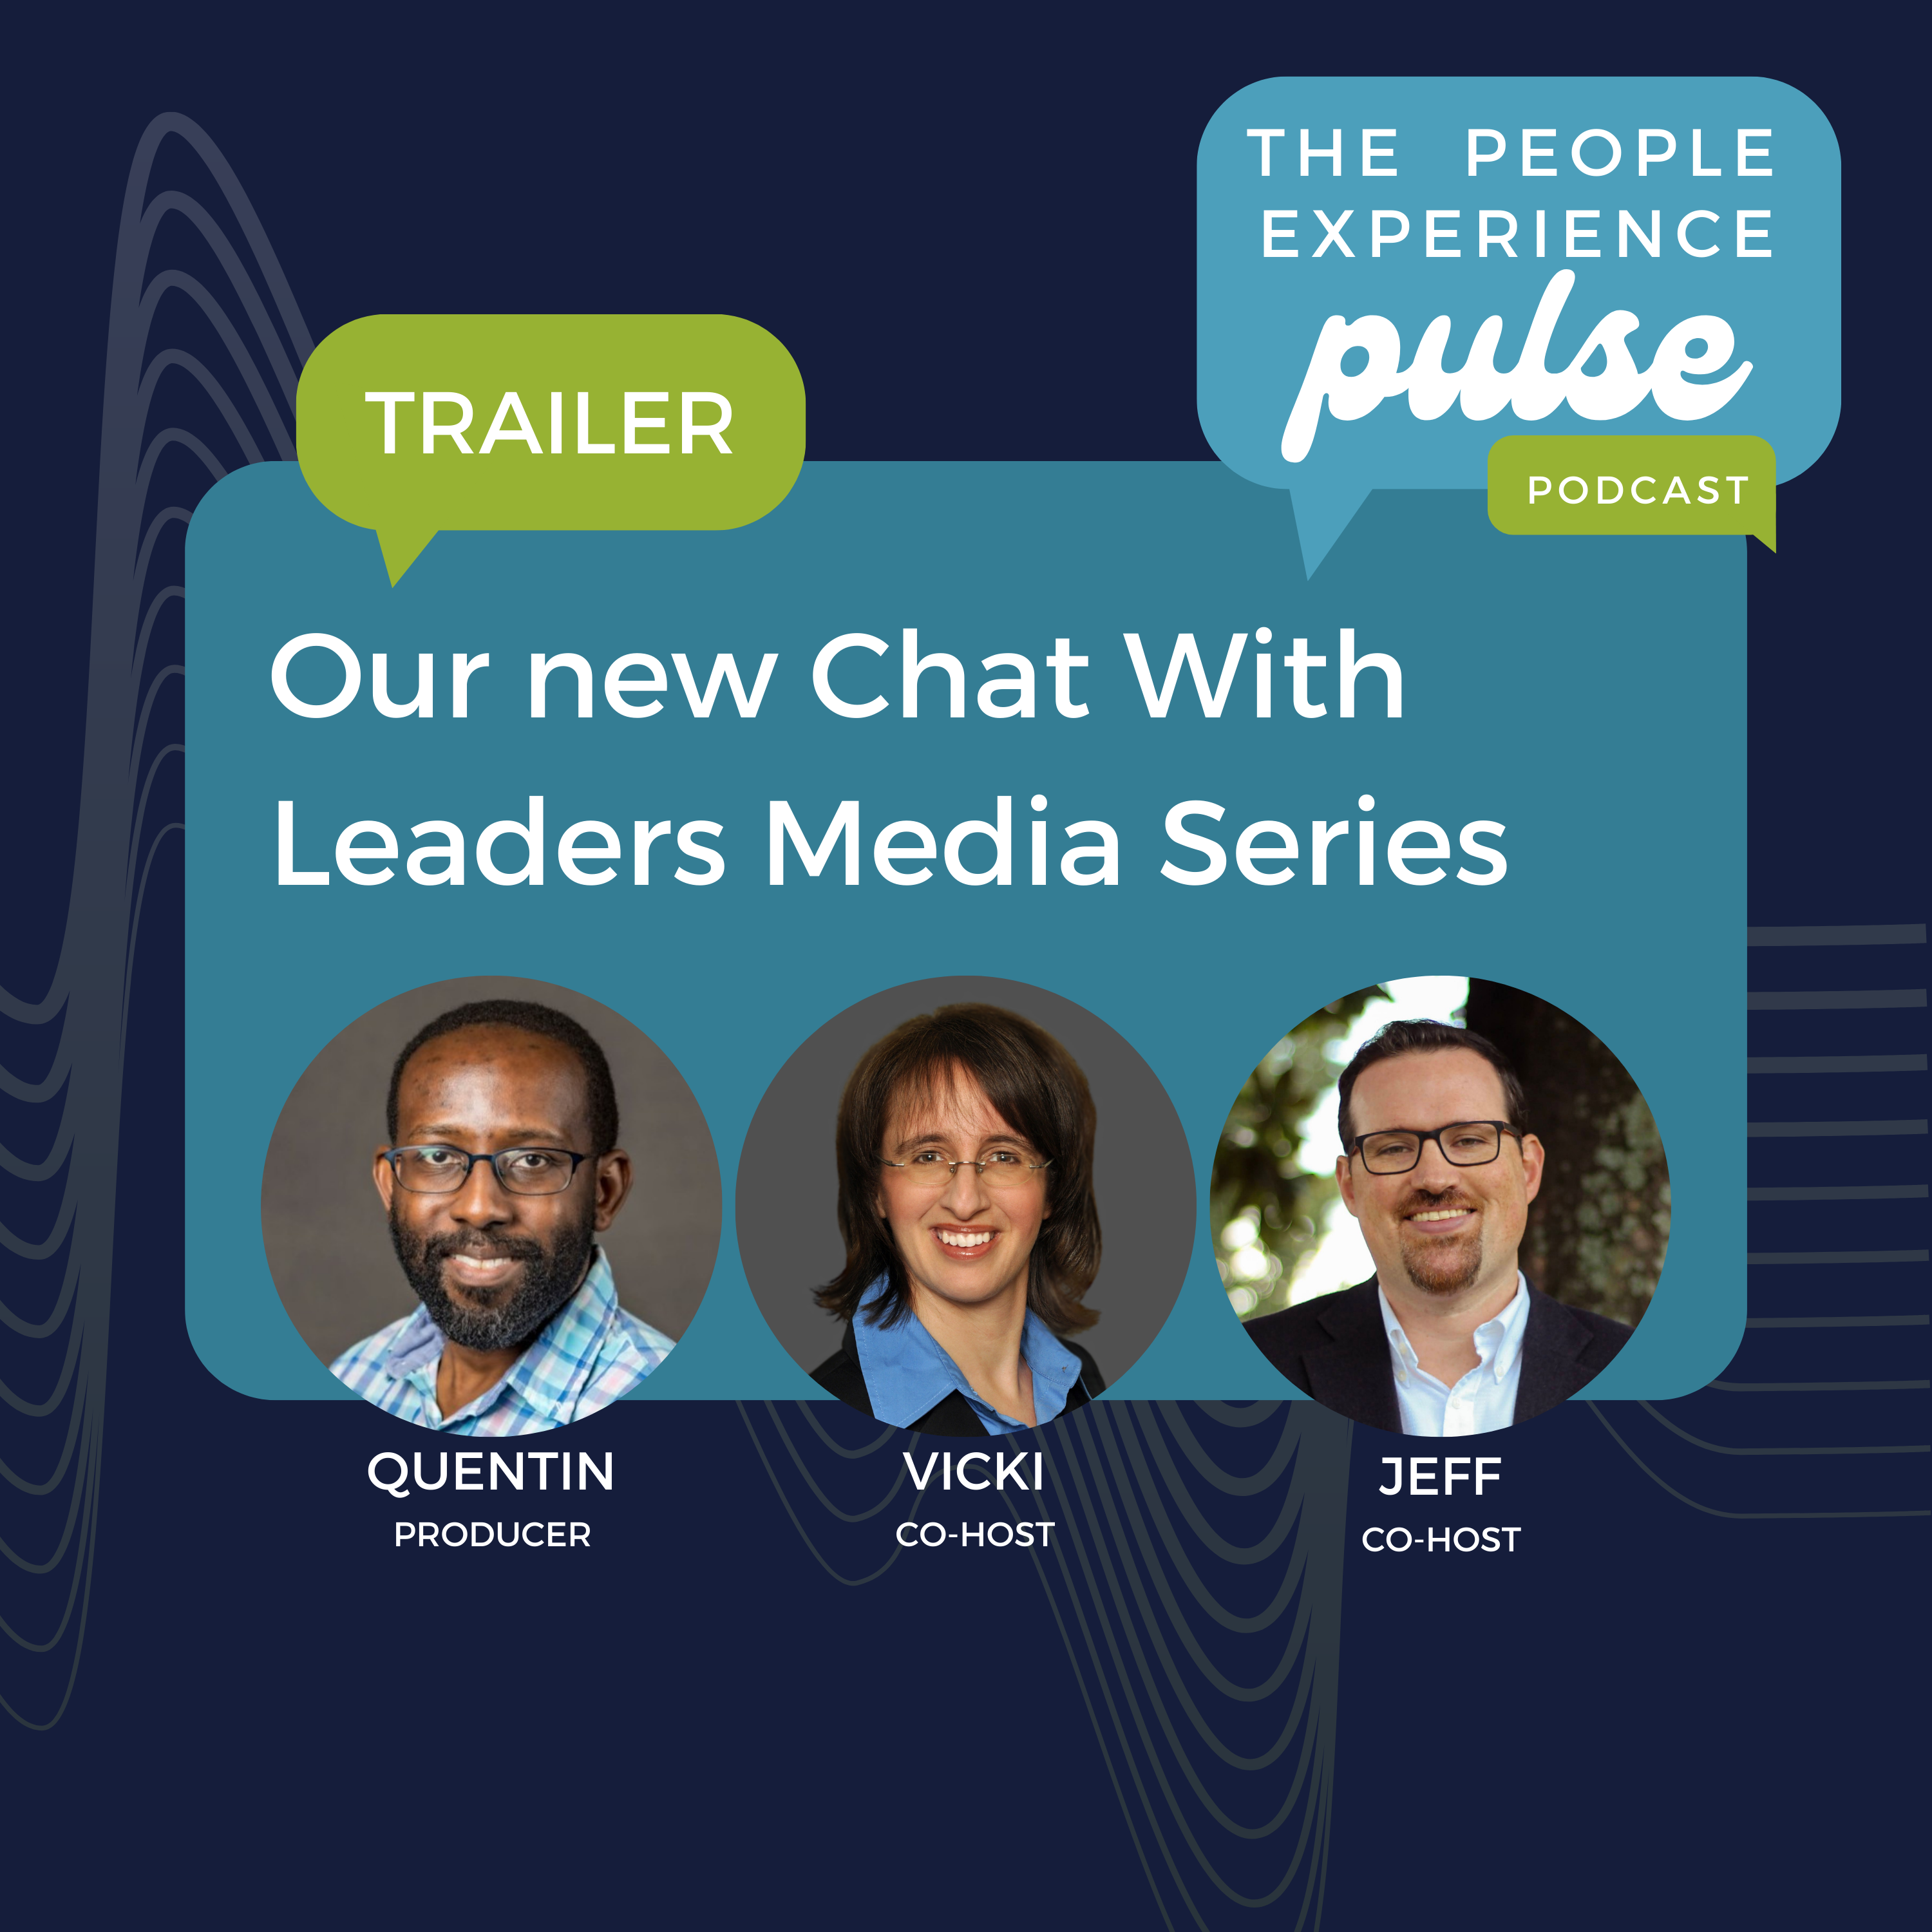 Introducing The People Experience Pulse